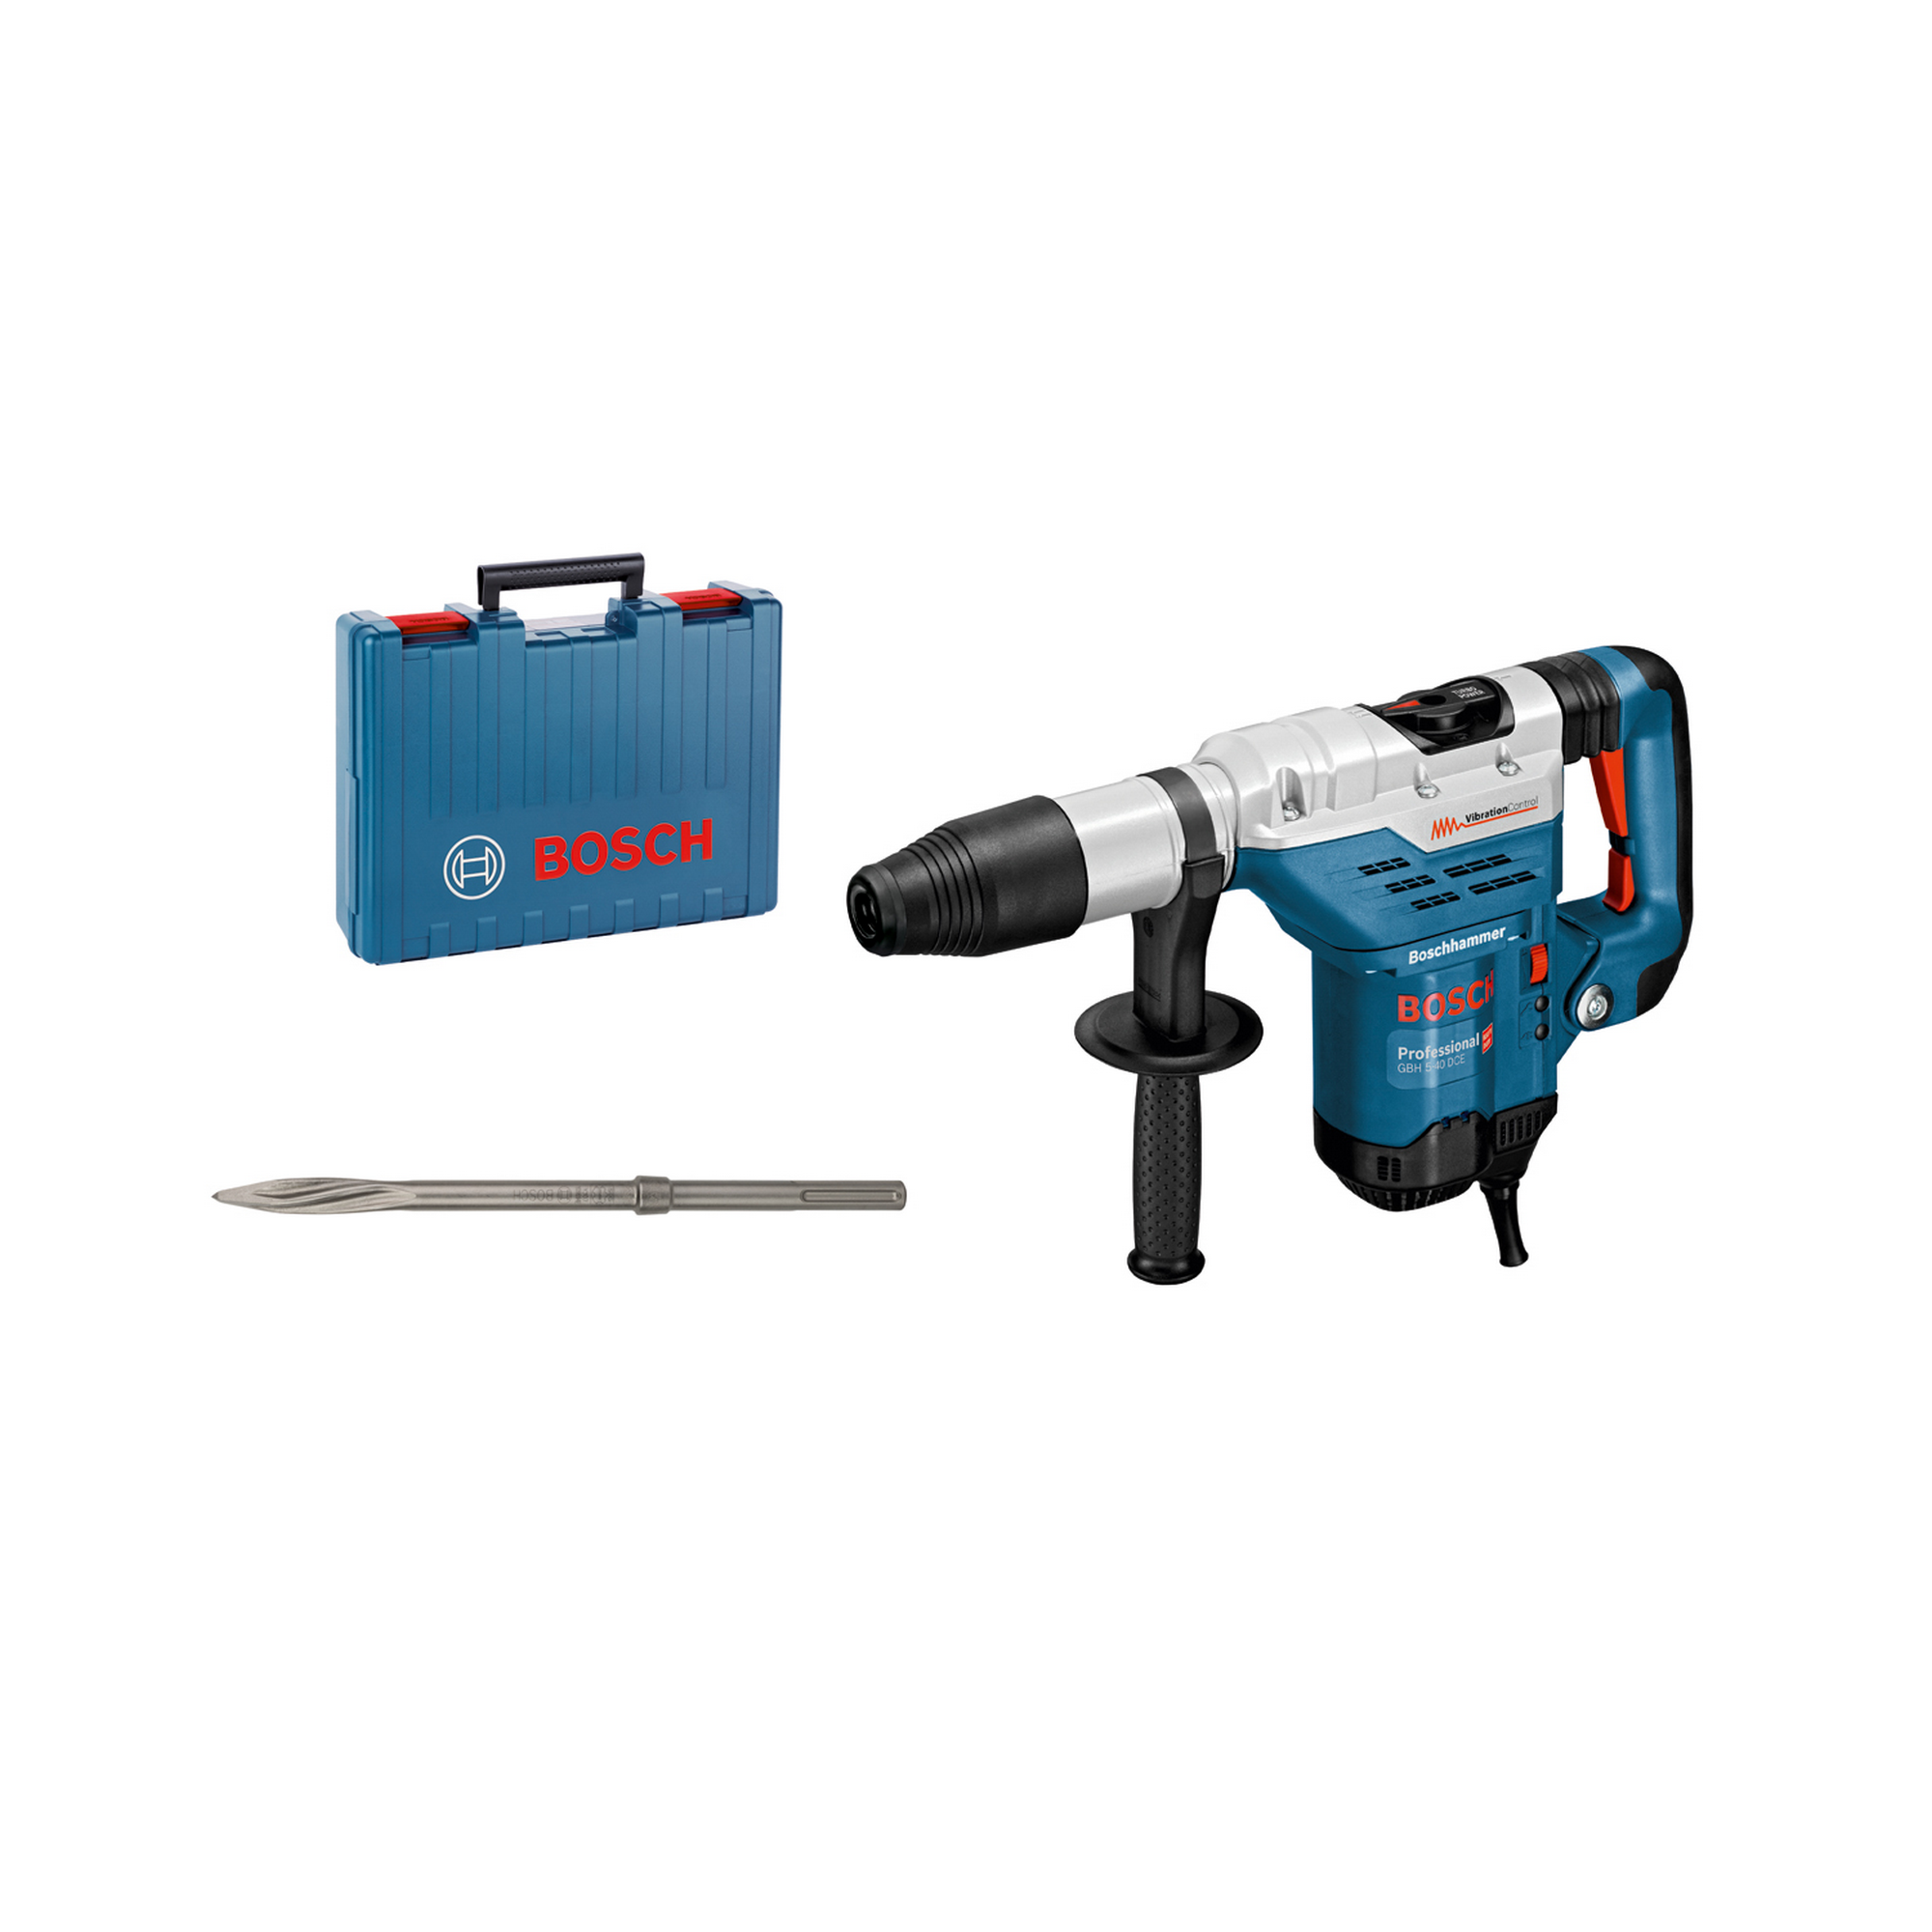 Bohrhammer 'GBH 5-40 DCE Professional' in Koffer + product picture